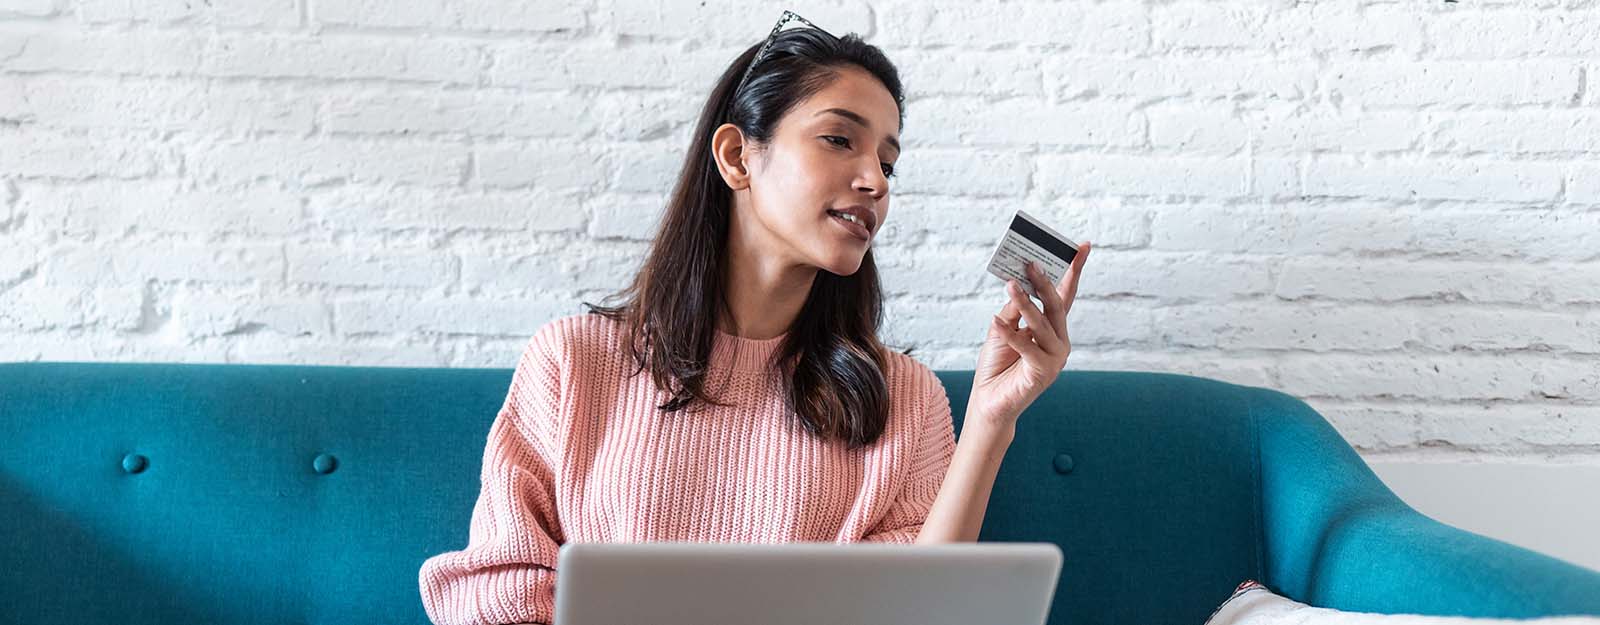 Woman on couch holding debit card while working on laptop